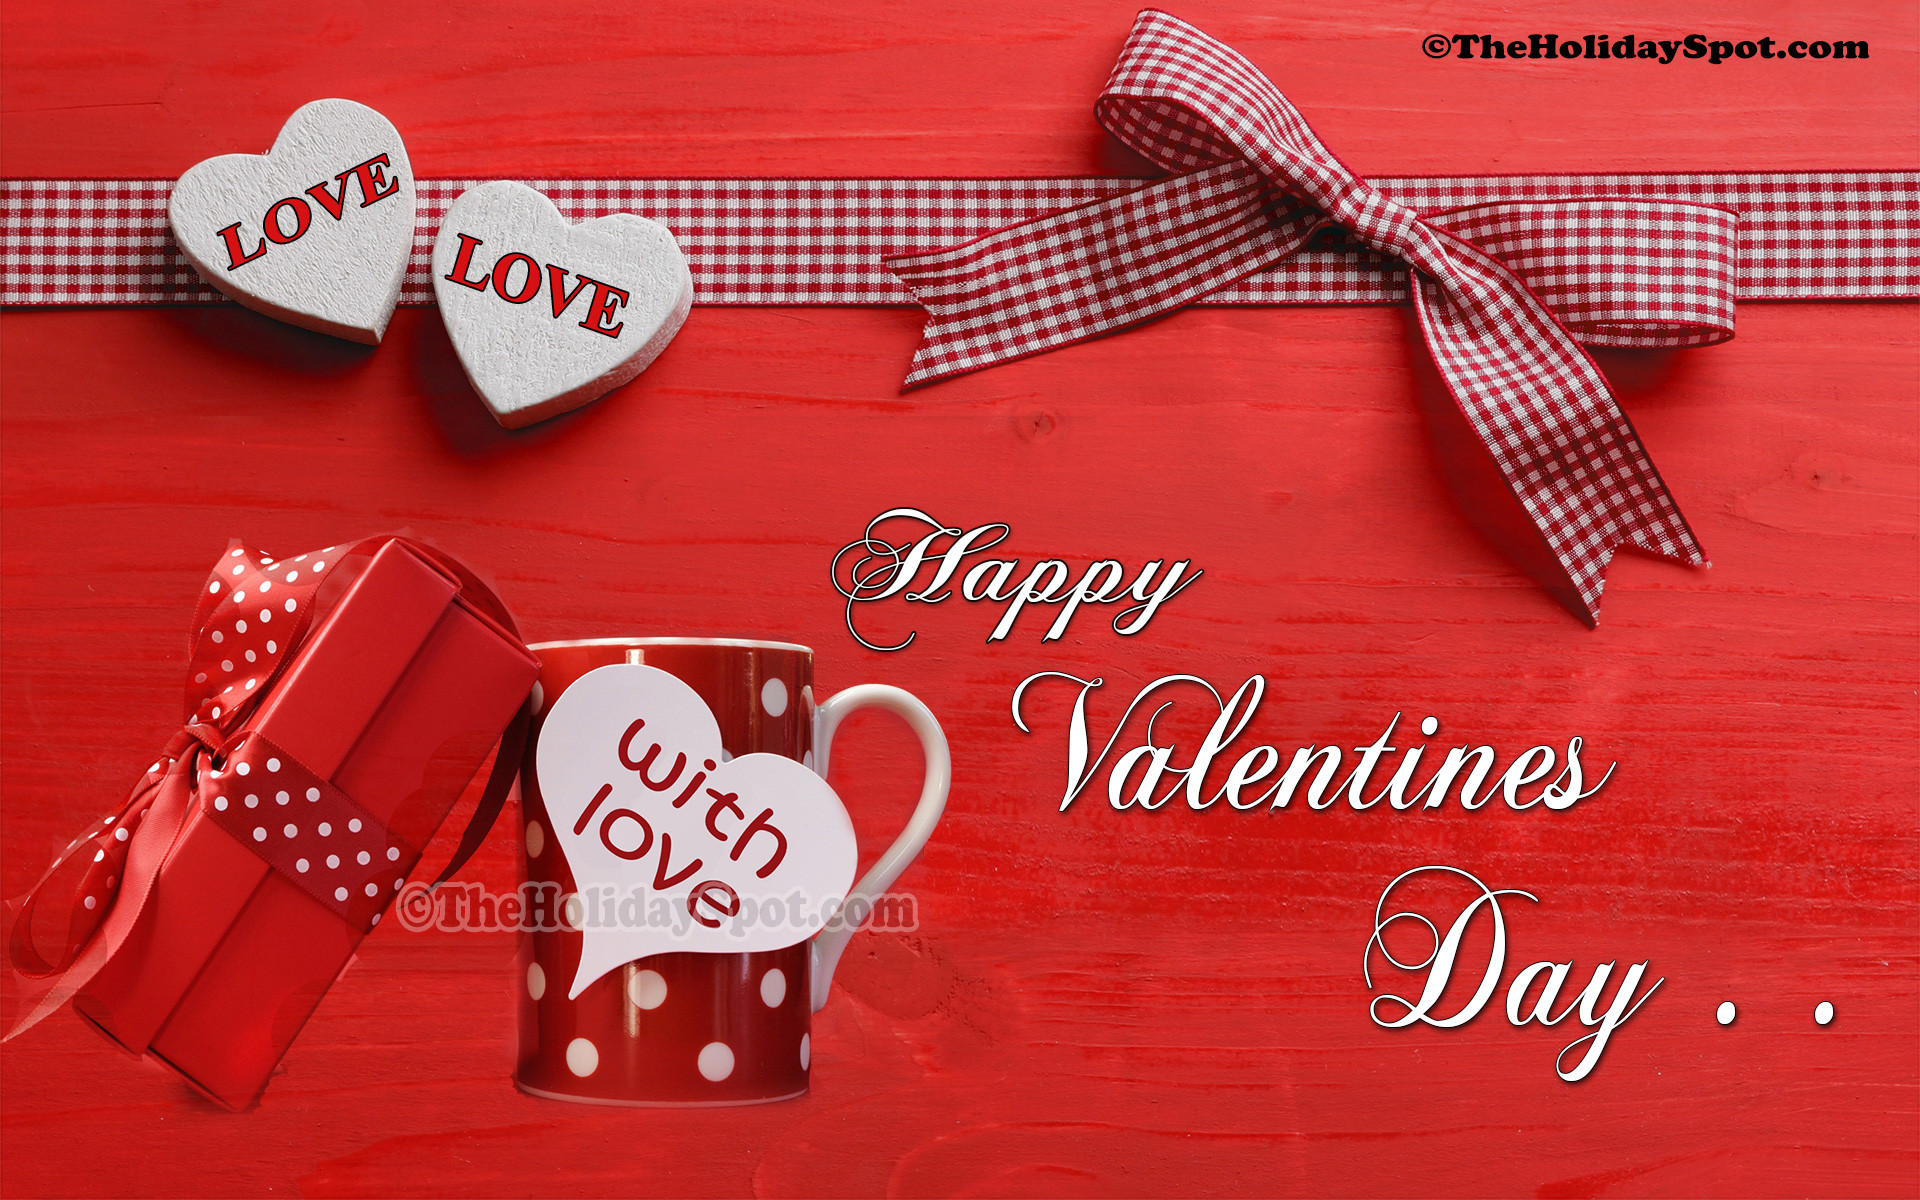 83 Free Valentine 039 S Day Hd Wallpapers For Download Background Images Desktop Wallpapers 1920x1200